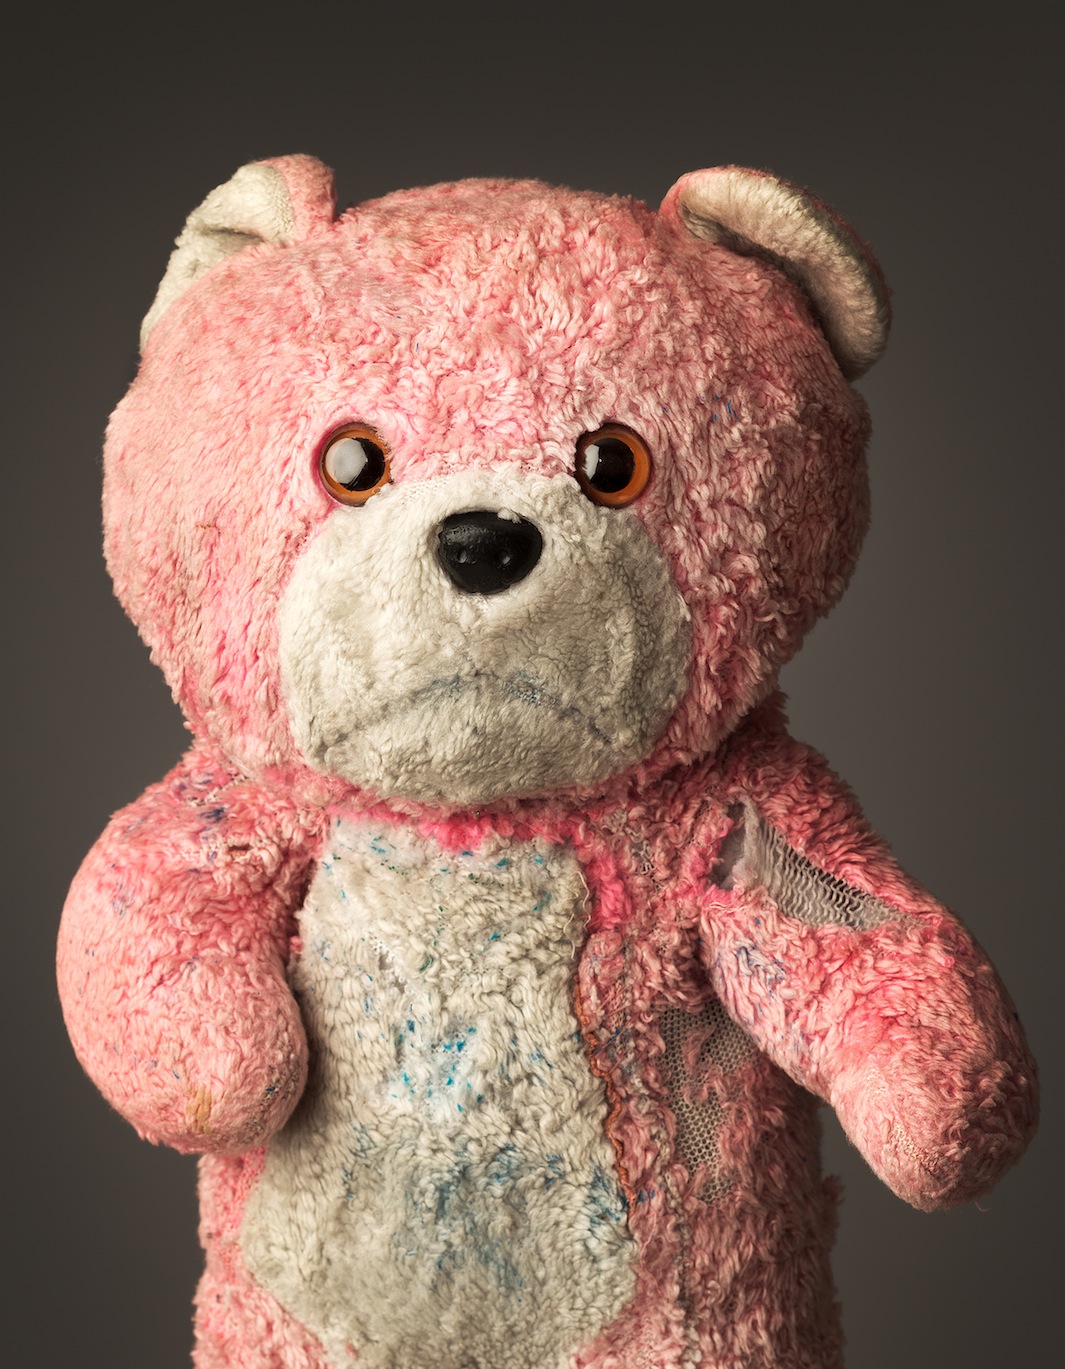 Aisling%20Hurley-Pink%20Teddy%20copy